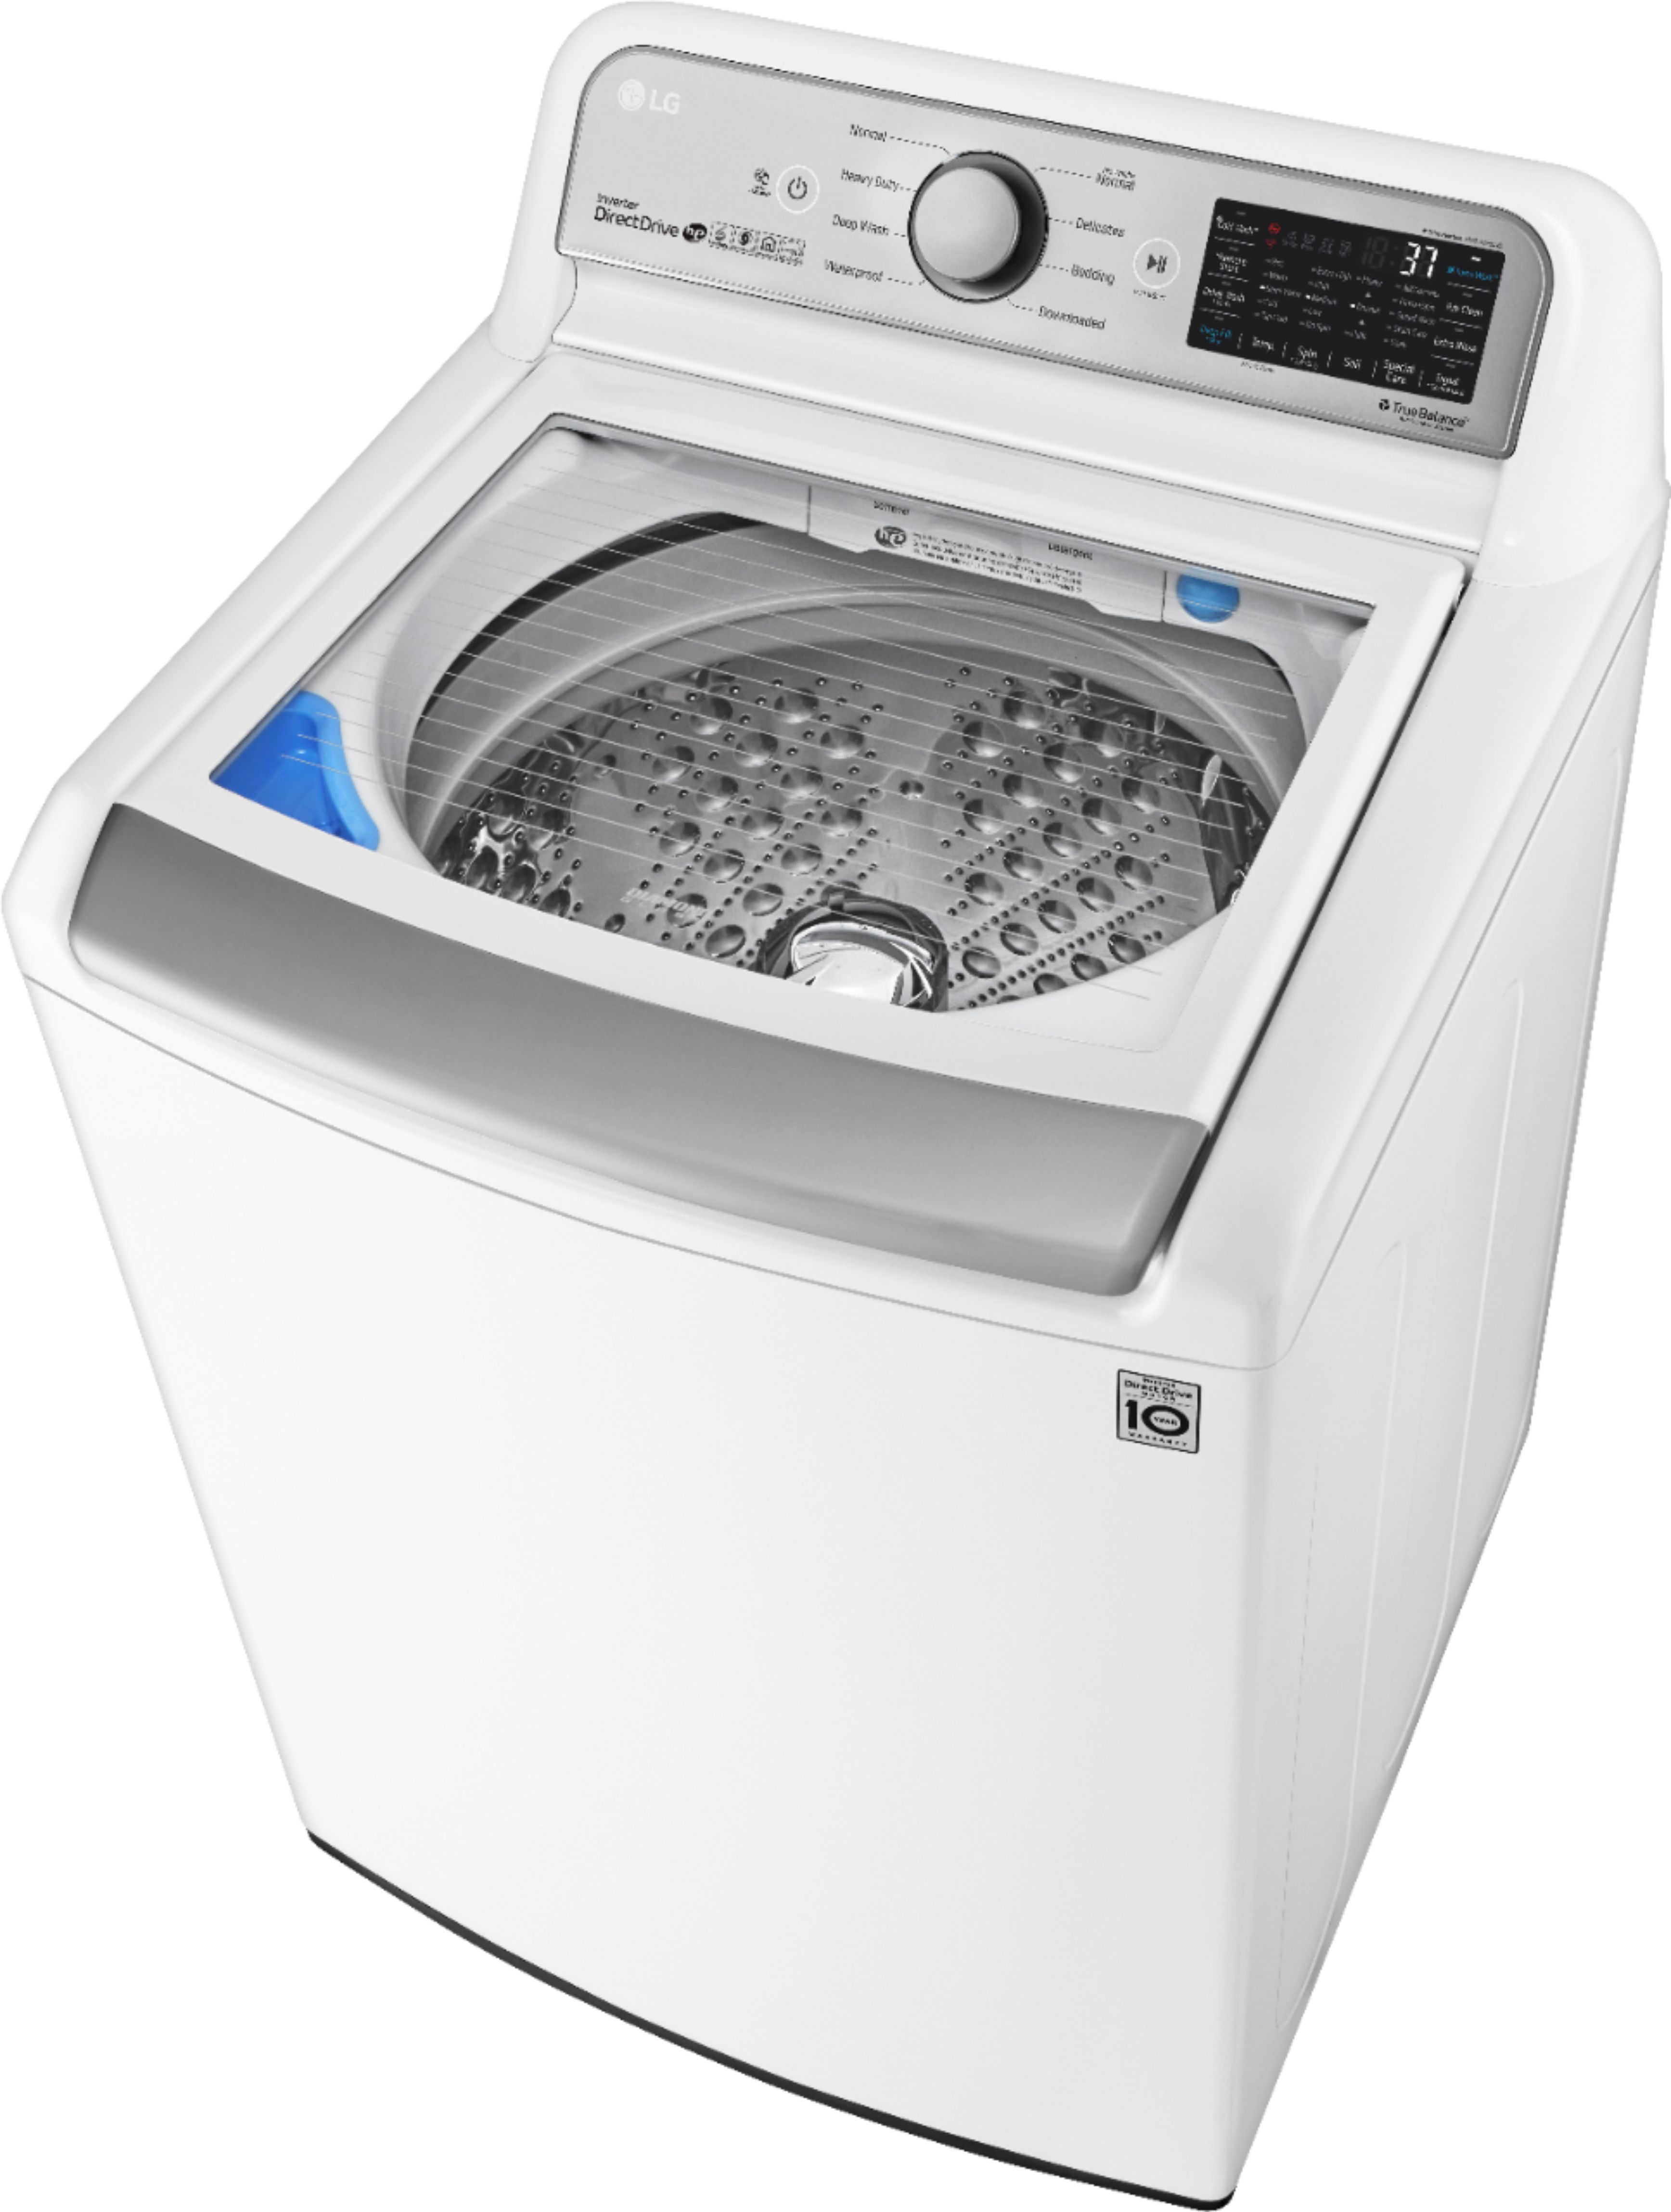 LG 4.8 Cu. Ft. HighEfficiency Top Load Washer with 4Way Agitator